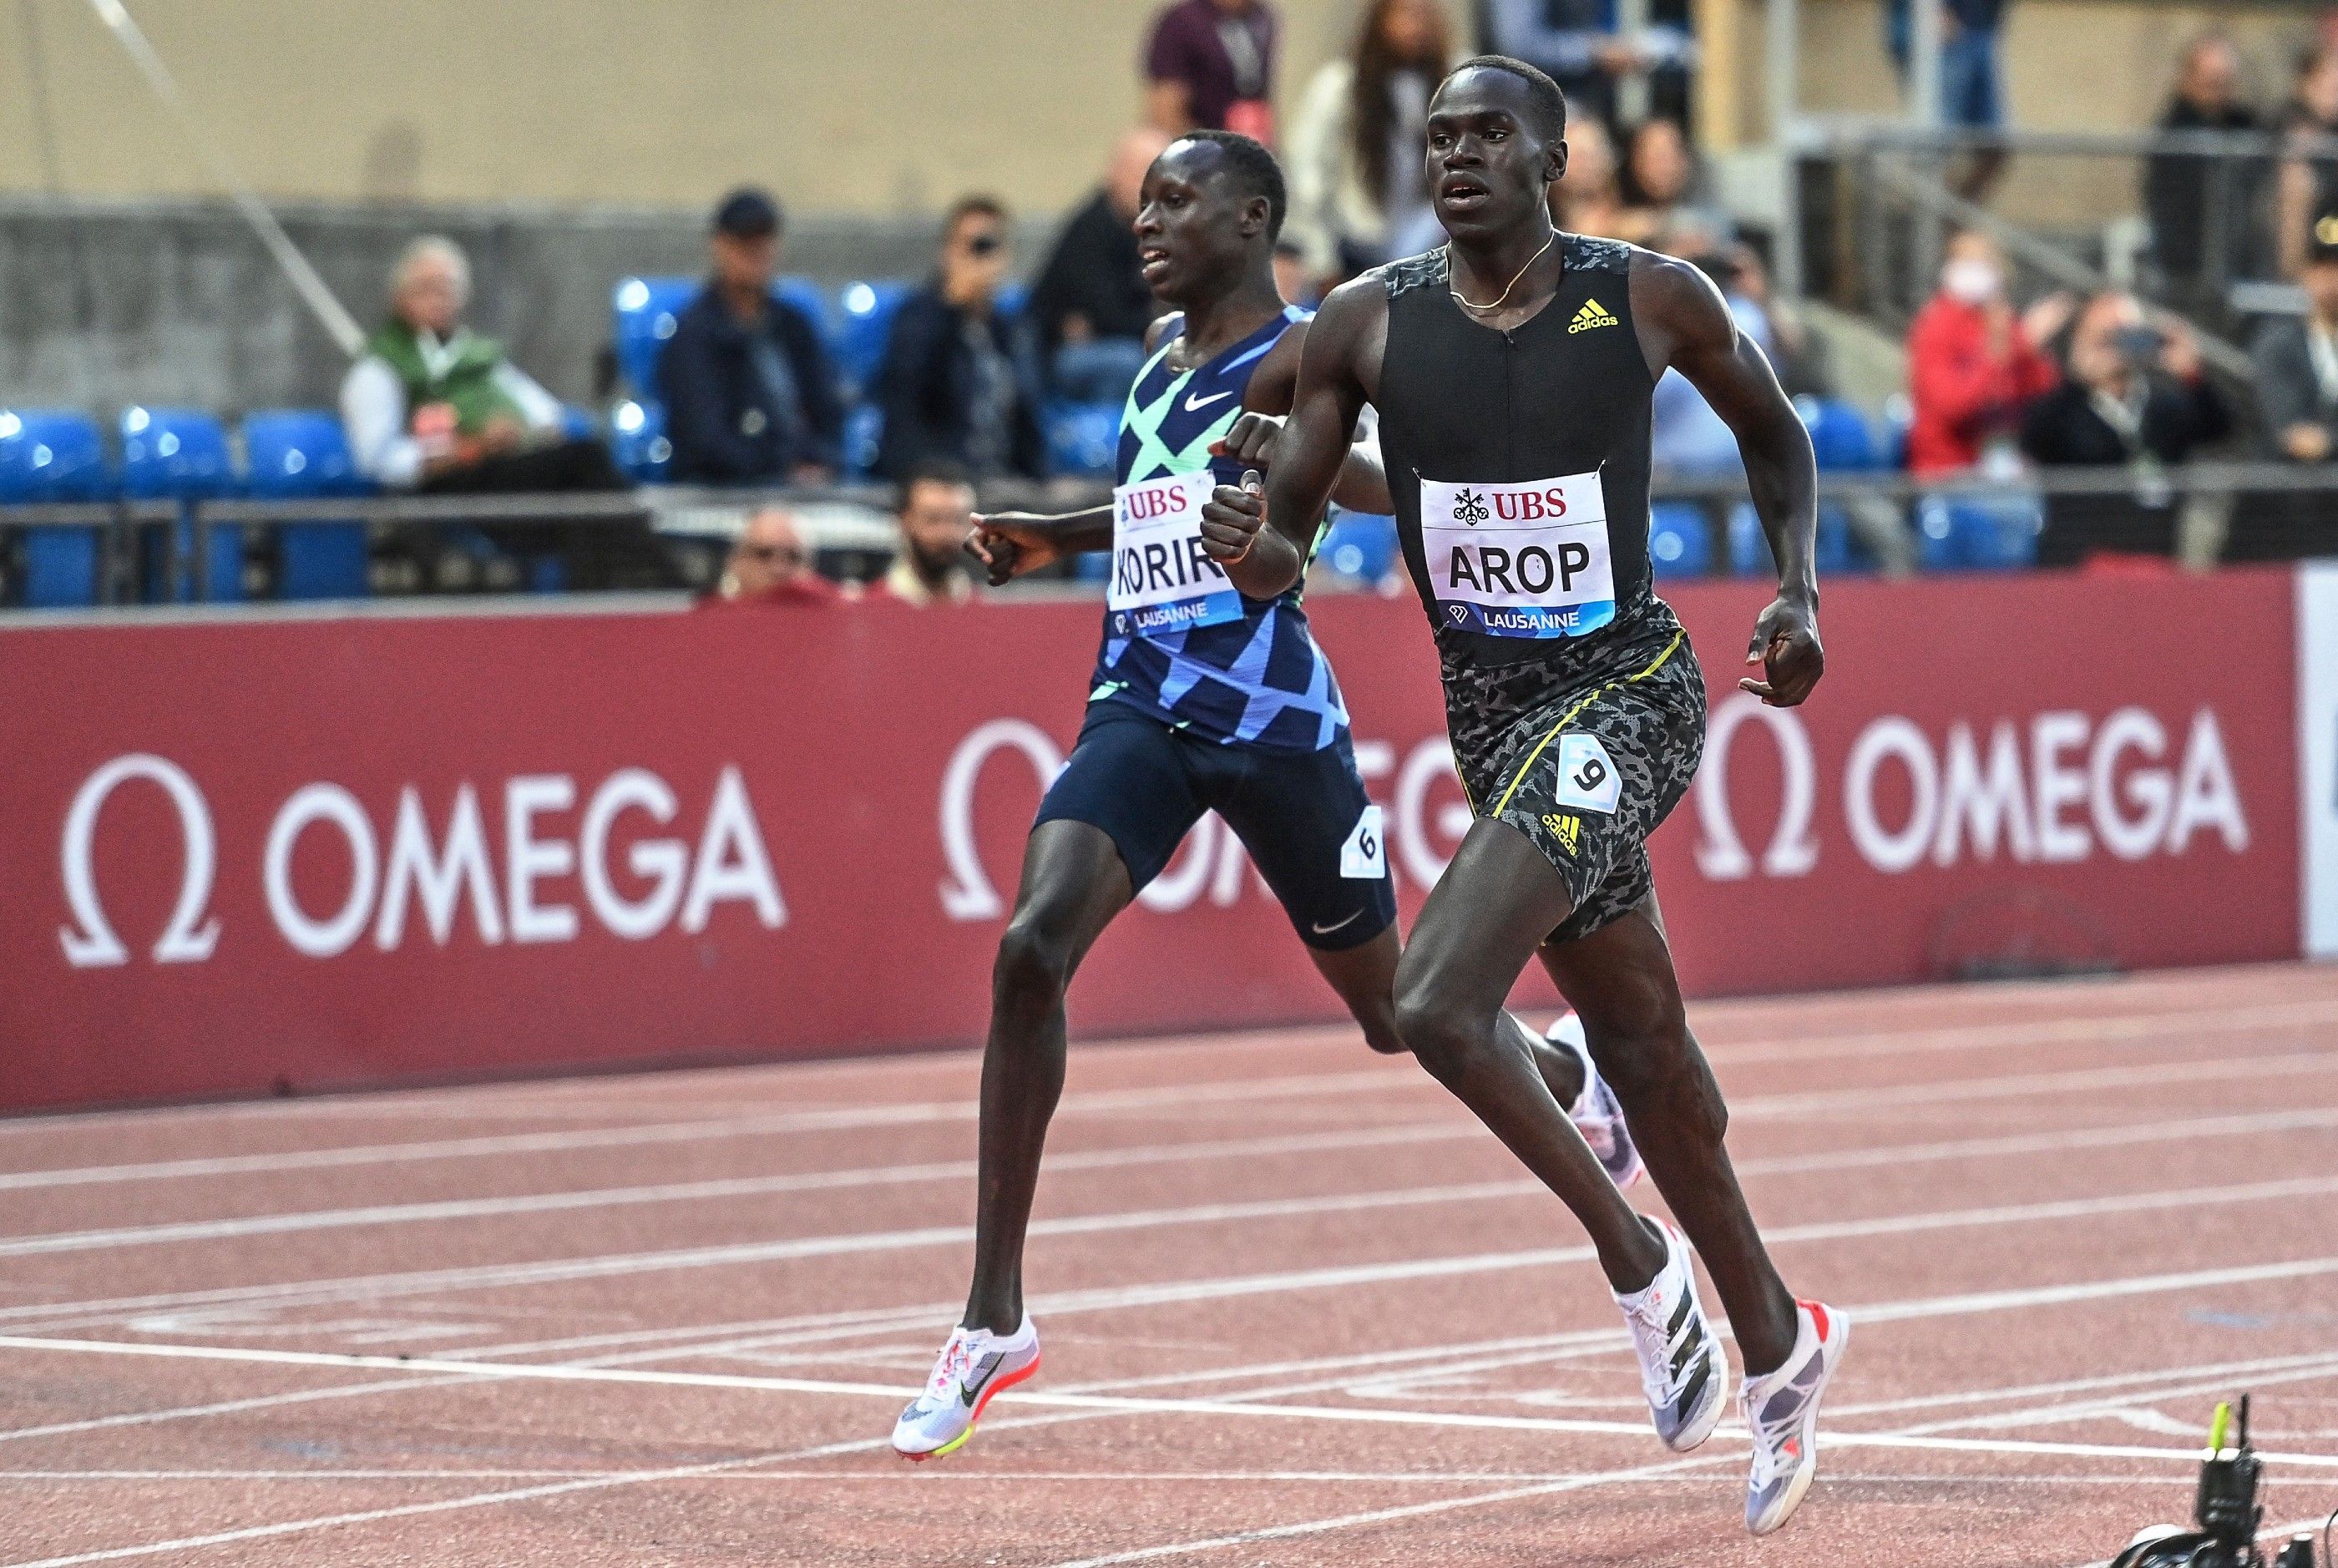 Marco Arop wins the 800m at the Wanda Diamond League in Lausanne